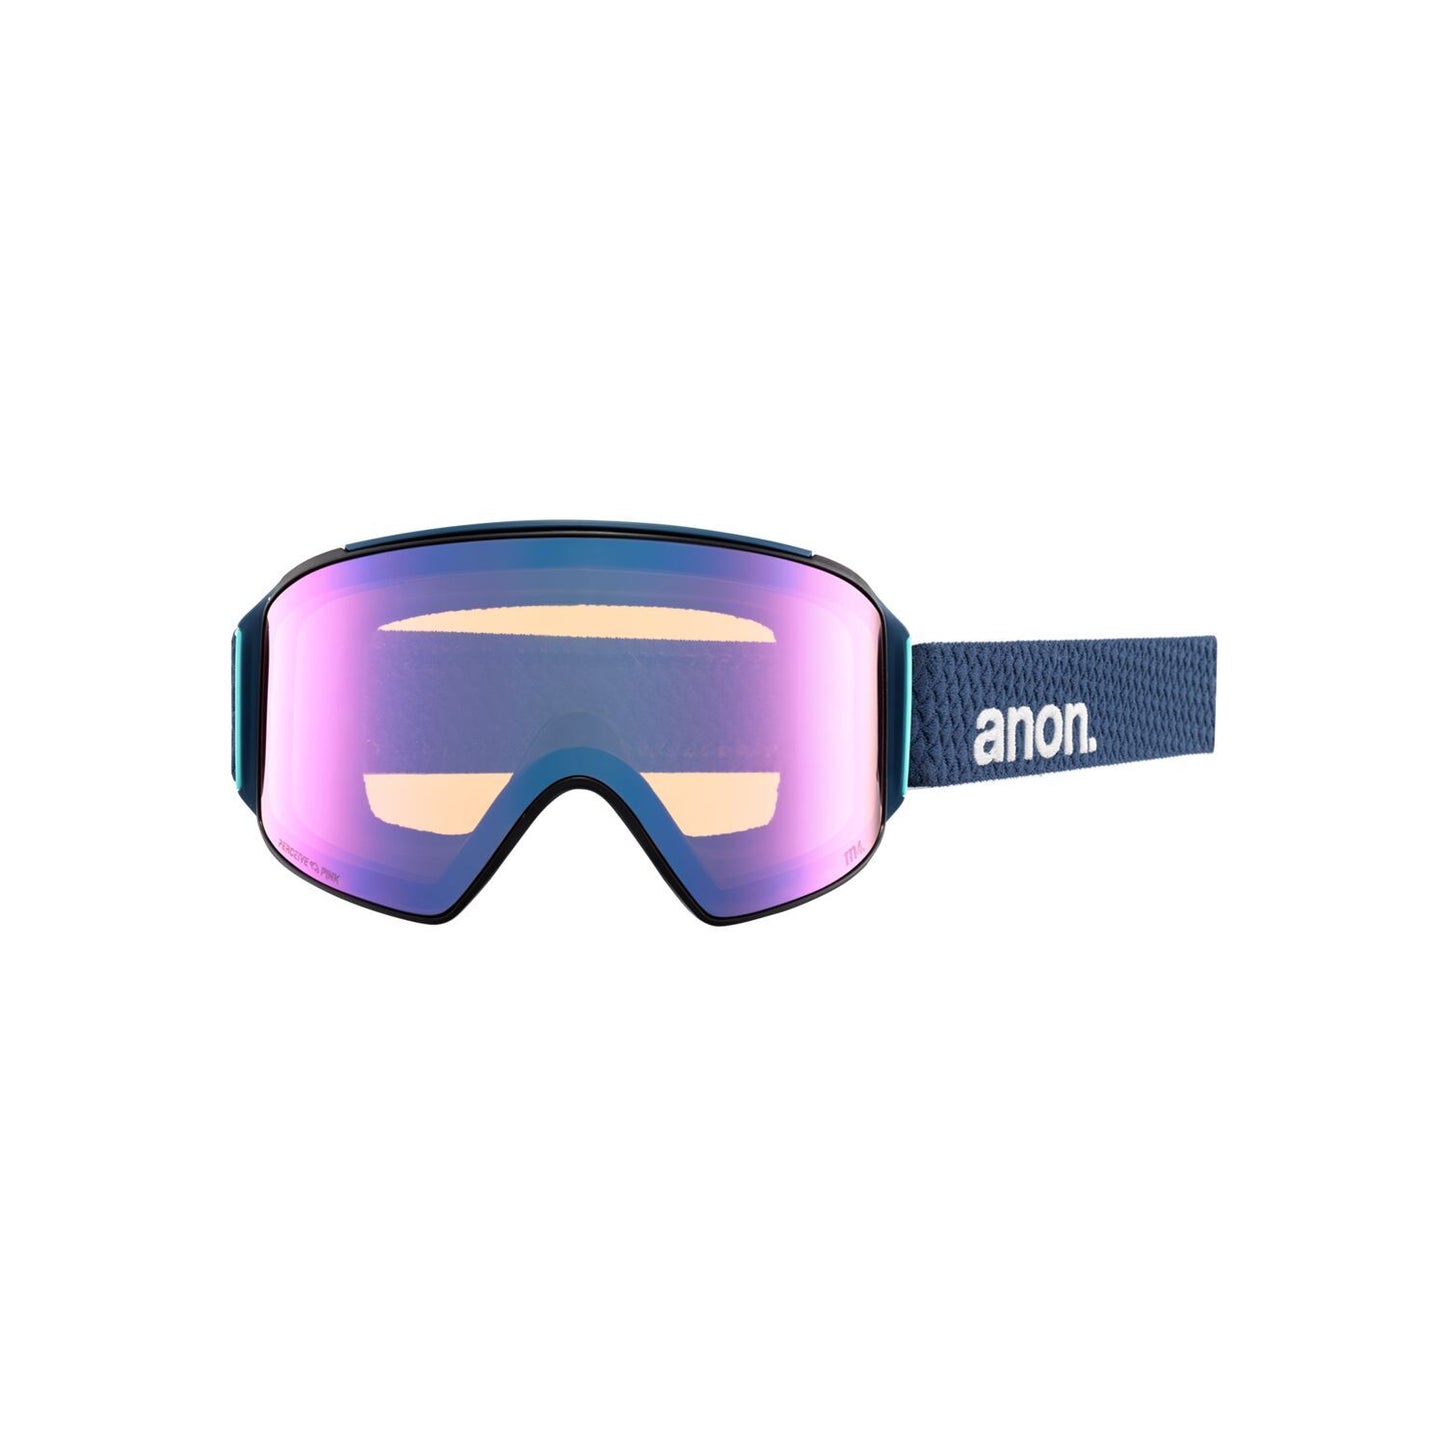 Anon M4 Cylindrical Goggles + Bonus Lens + MFI Face Mask - Low Bridge Fit Nightfall / Perceive Variable Blue Snow Goggles